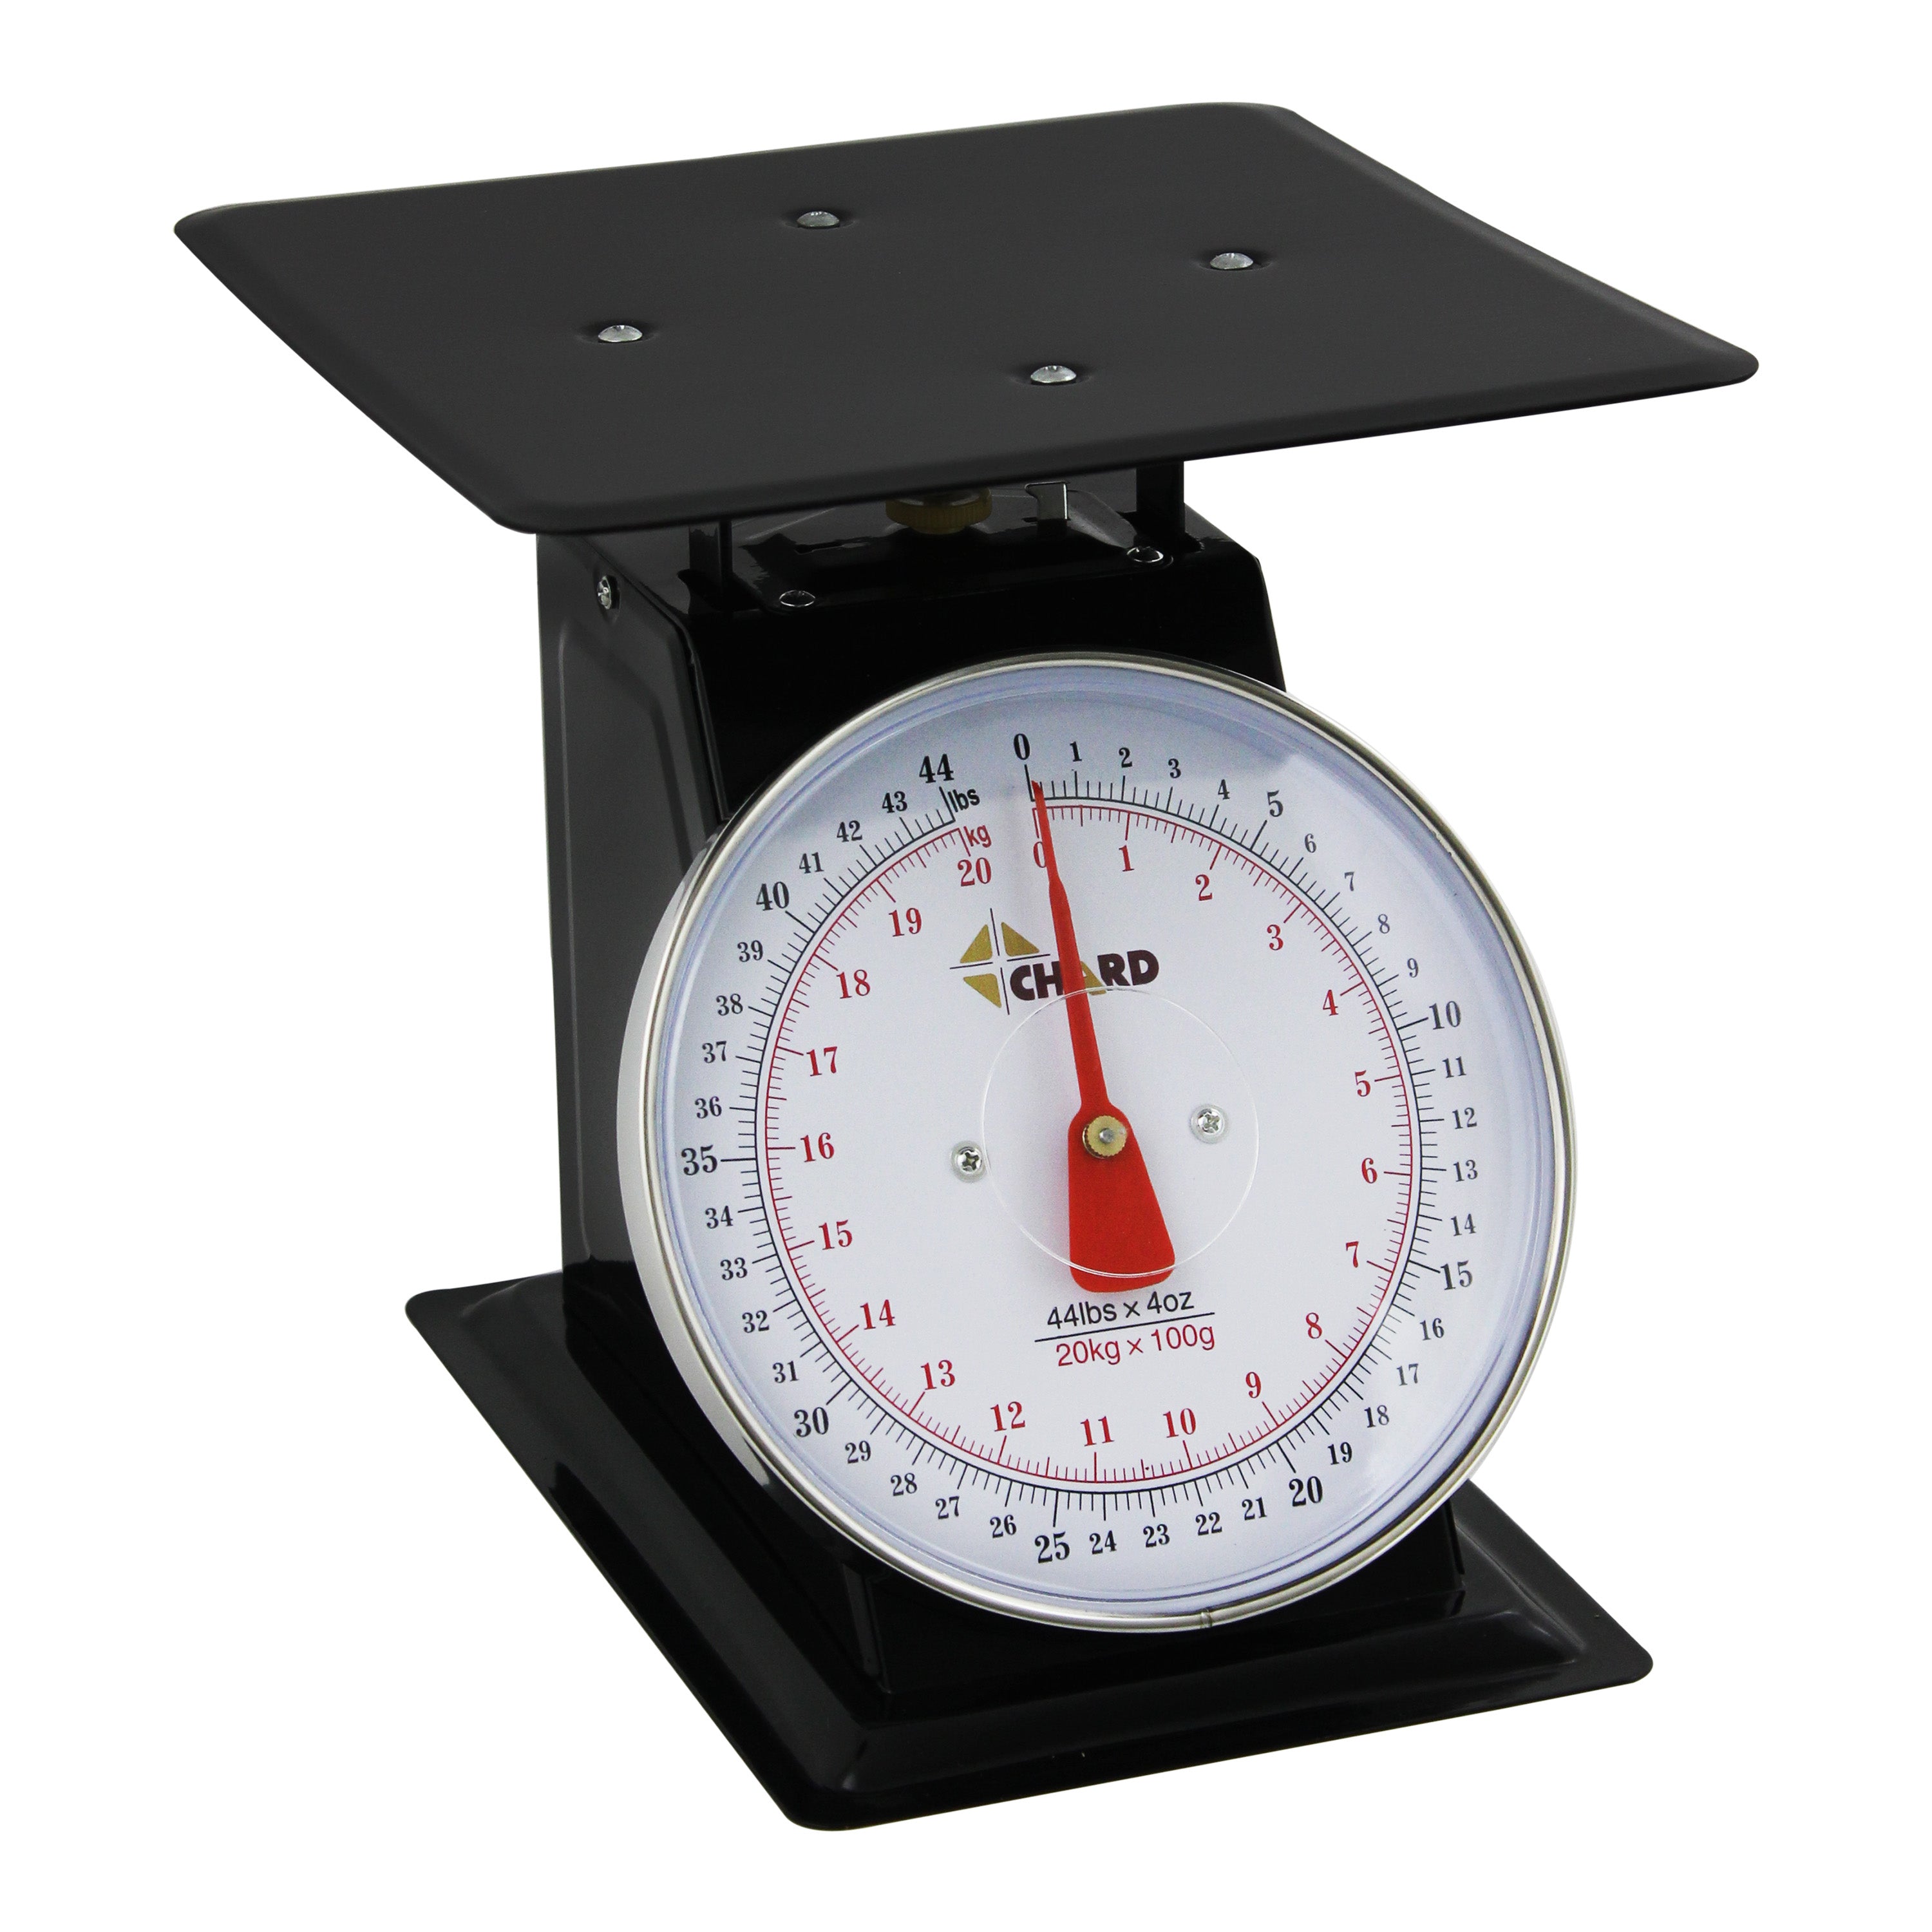 Sportsman 44 lb. Stainless Steel Dial Scale